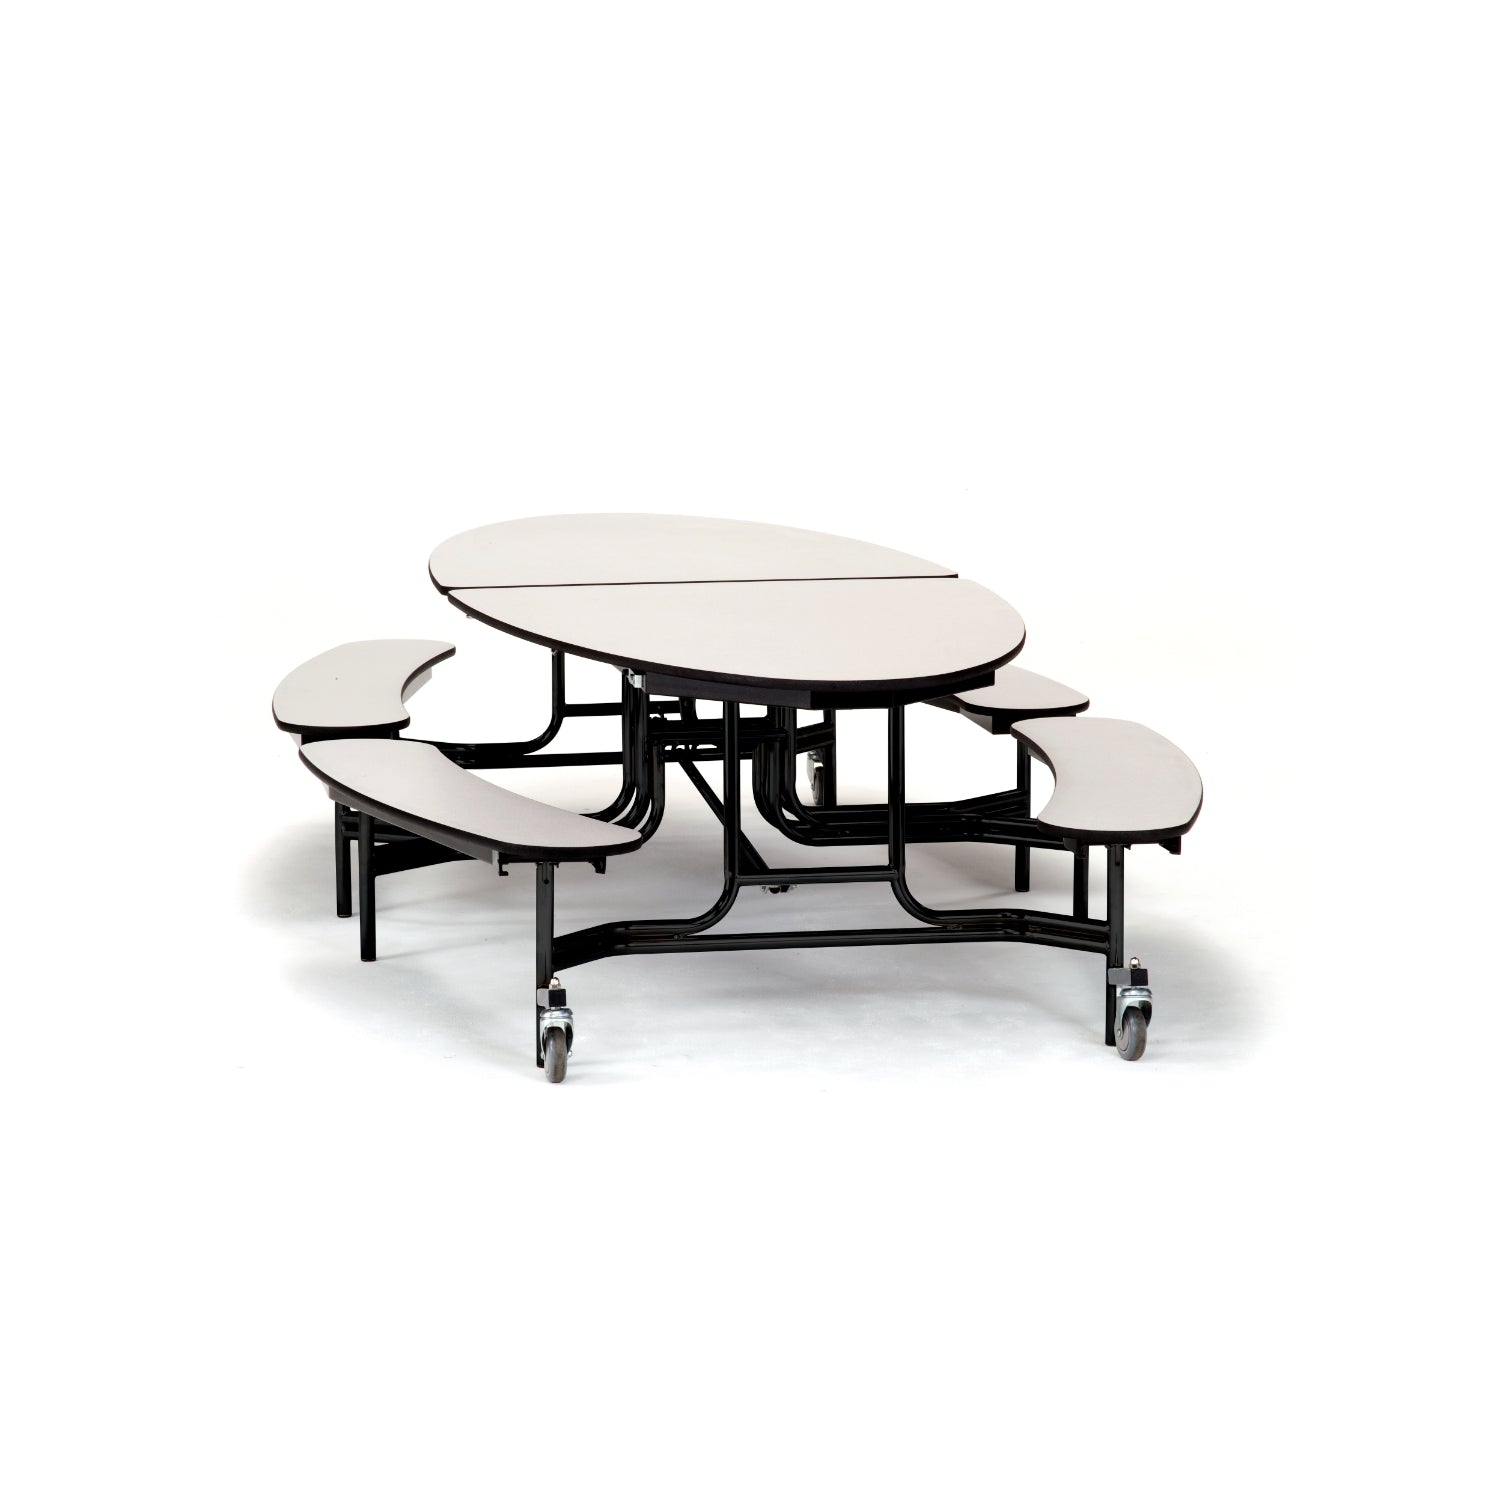 Mobile Cafeteria Table with Benches, 10' Elliptical, Plywood Core, Vinyl T-Mold Edge, Textured Black Frame